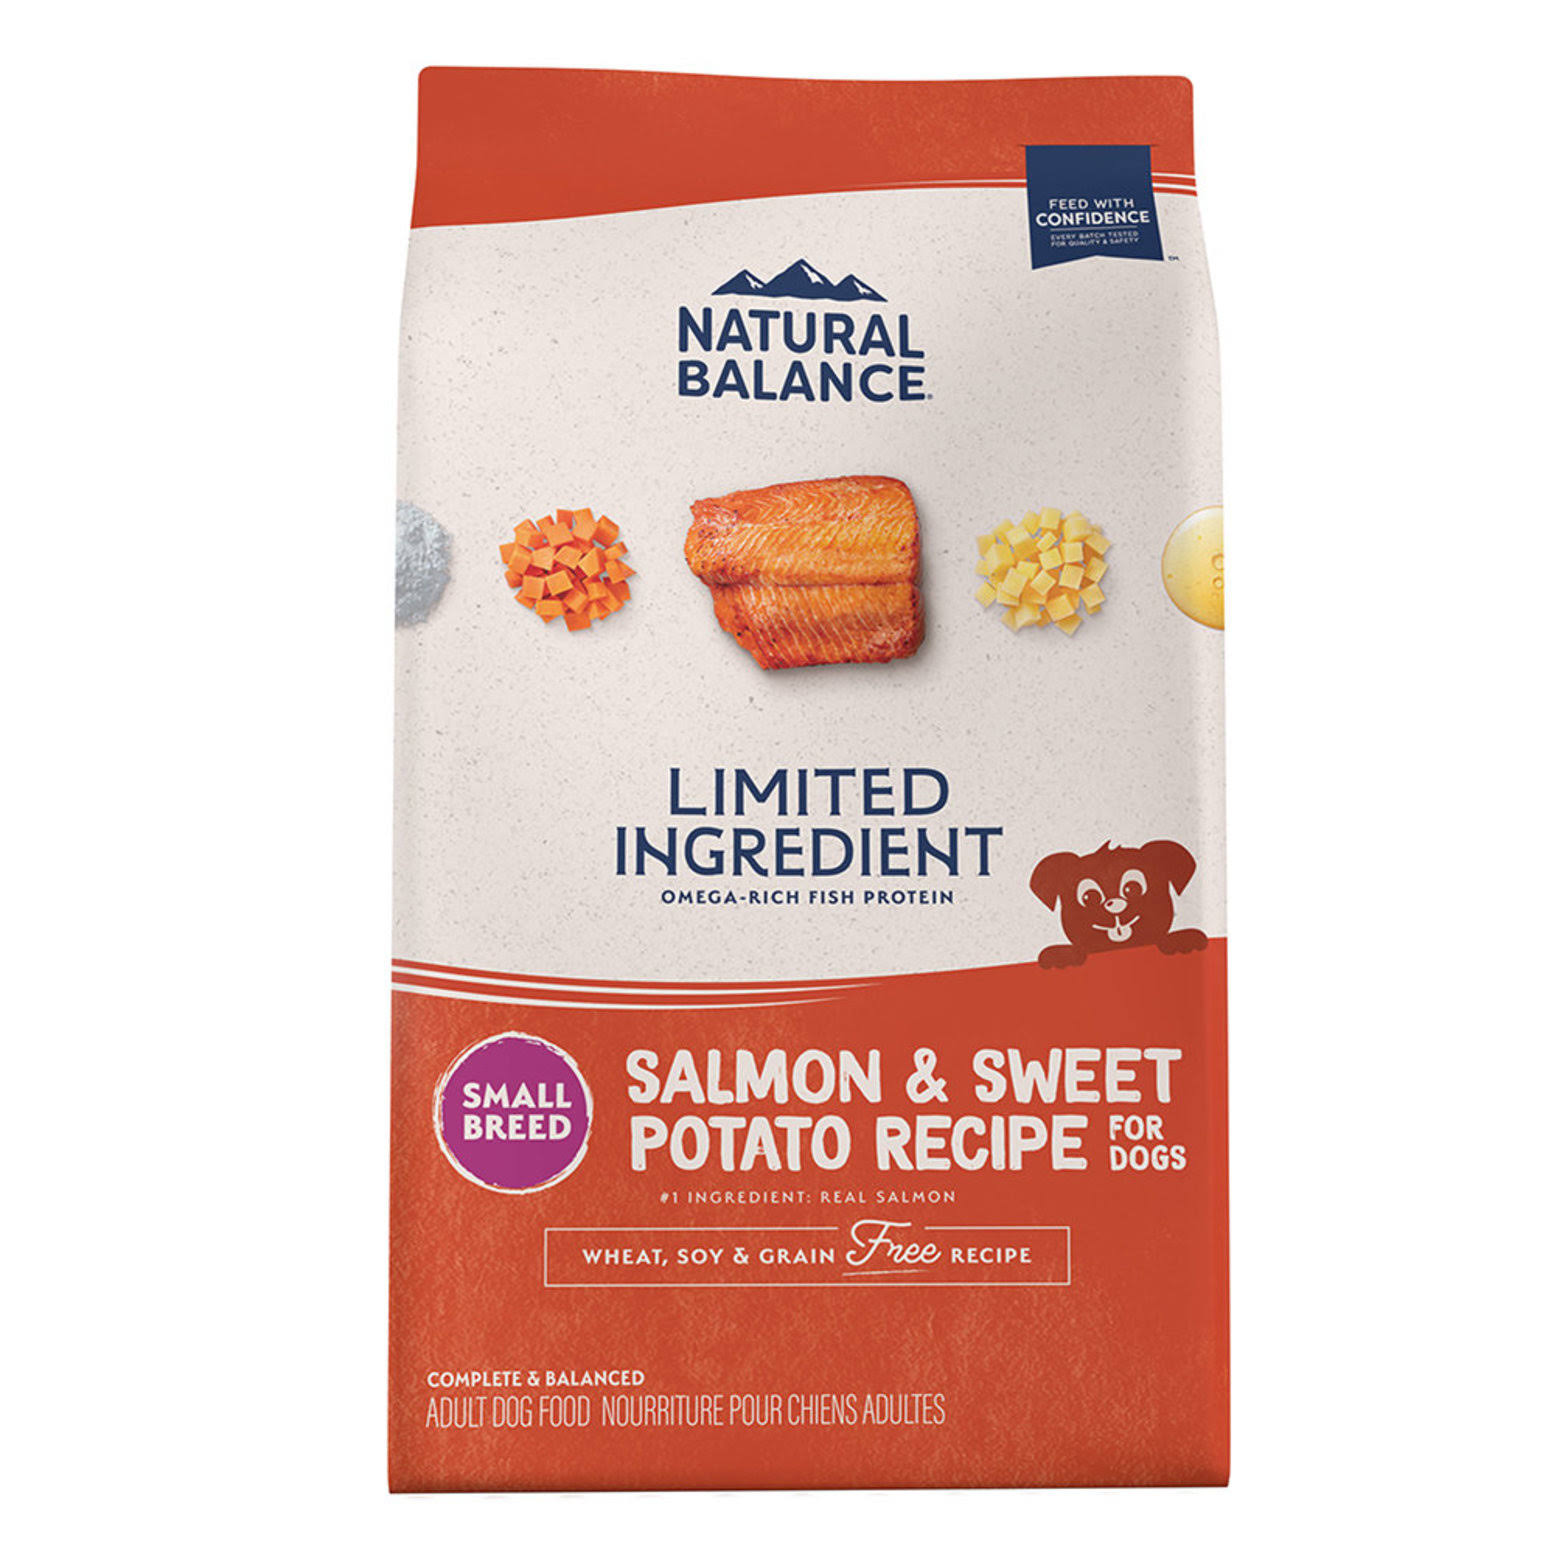 Natural Balance Limited Ingredient Small Breed Adult Dog Food - Salmon & Sweet Potato